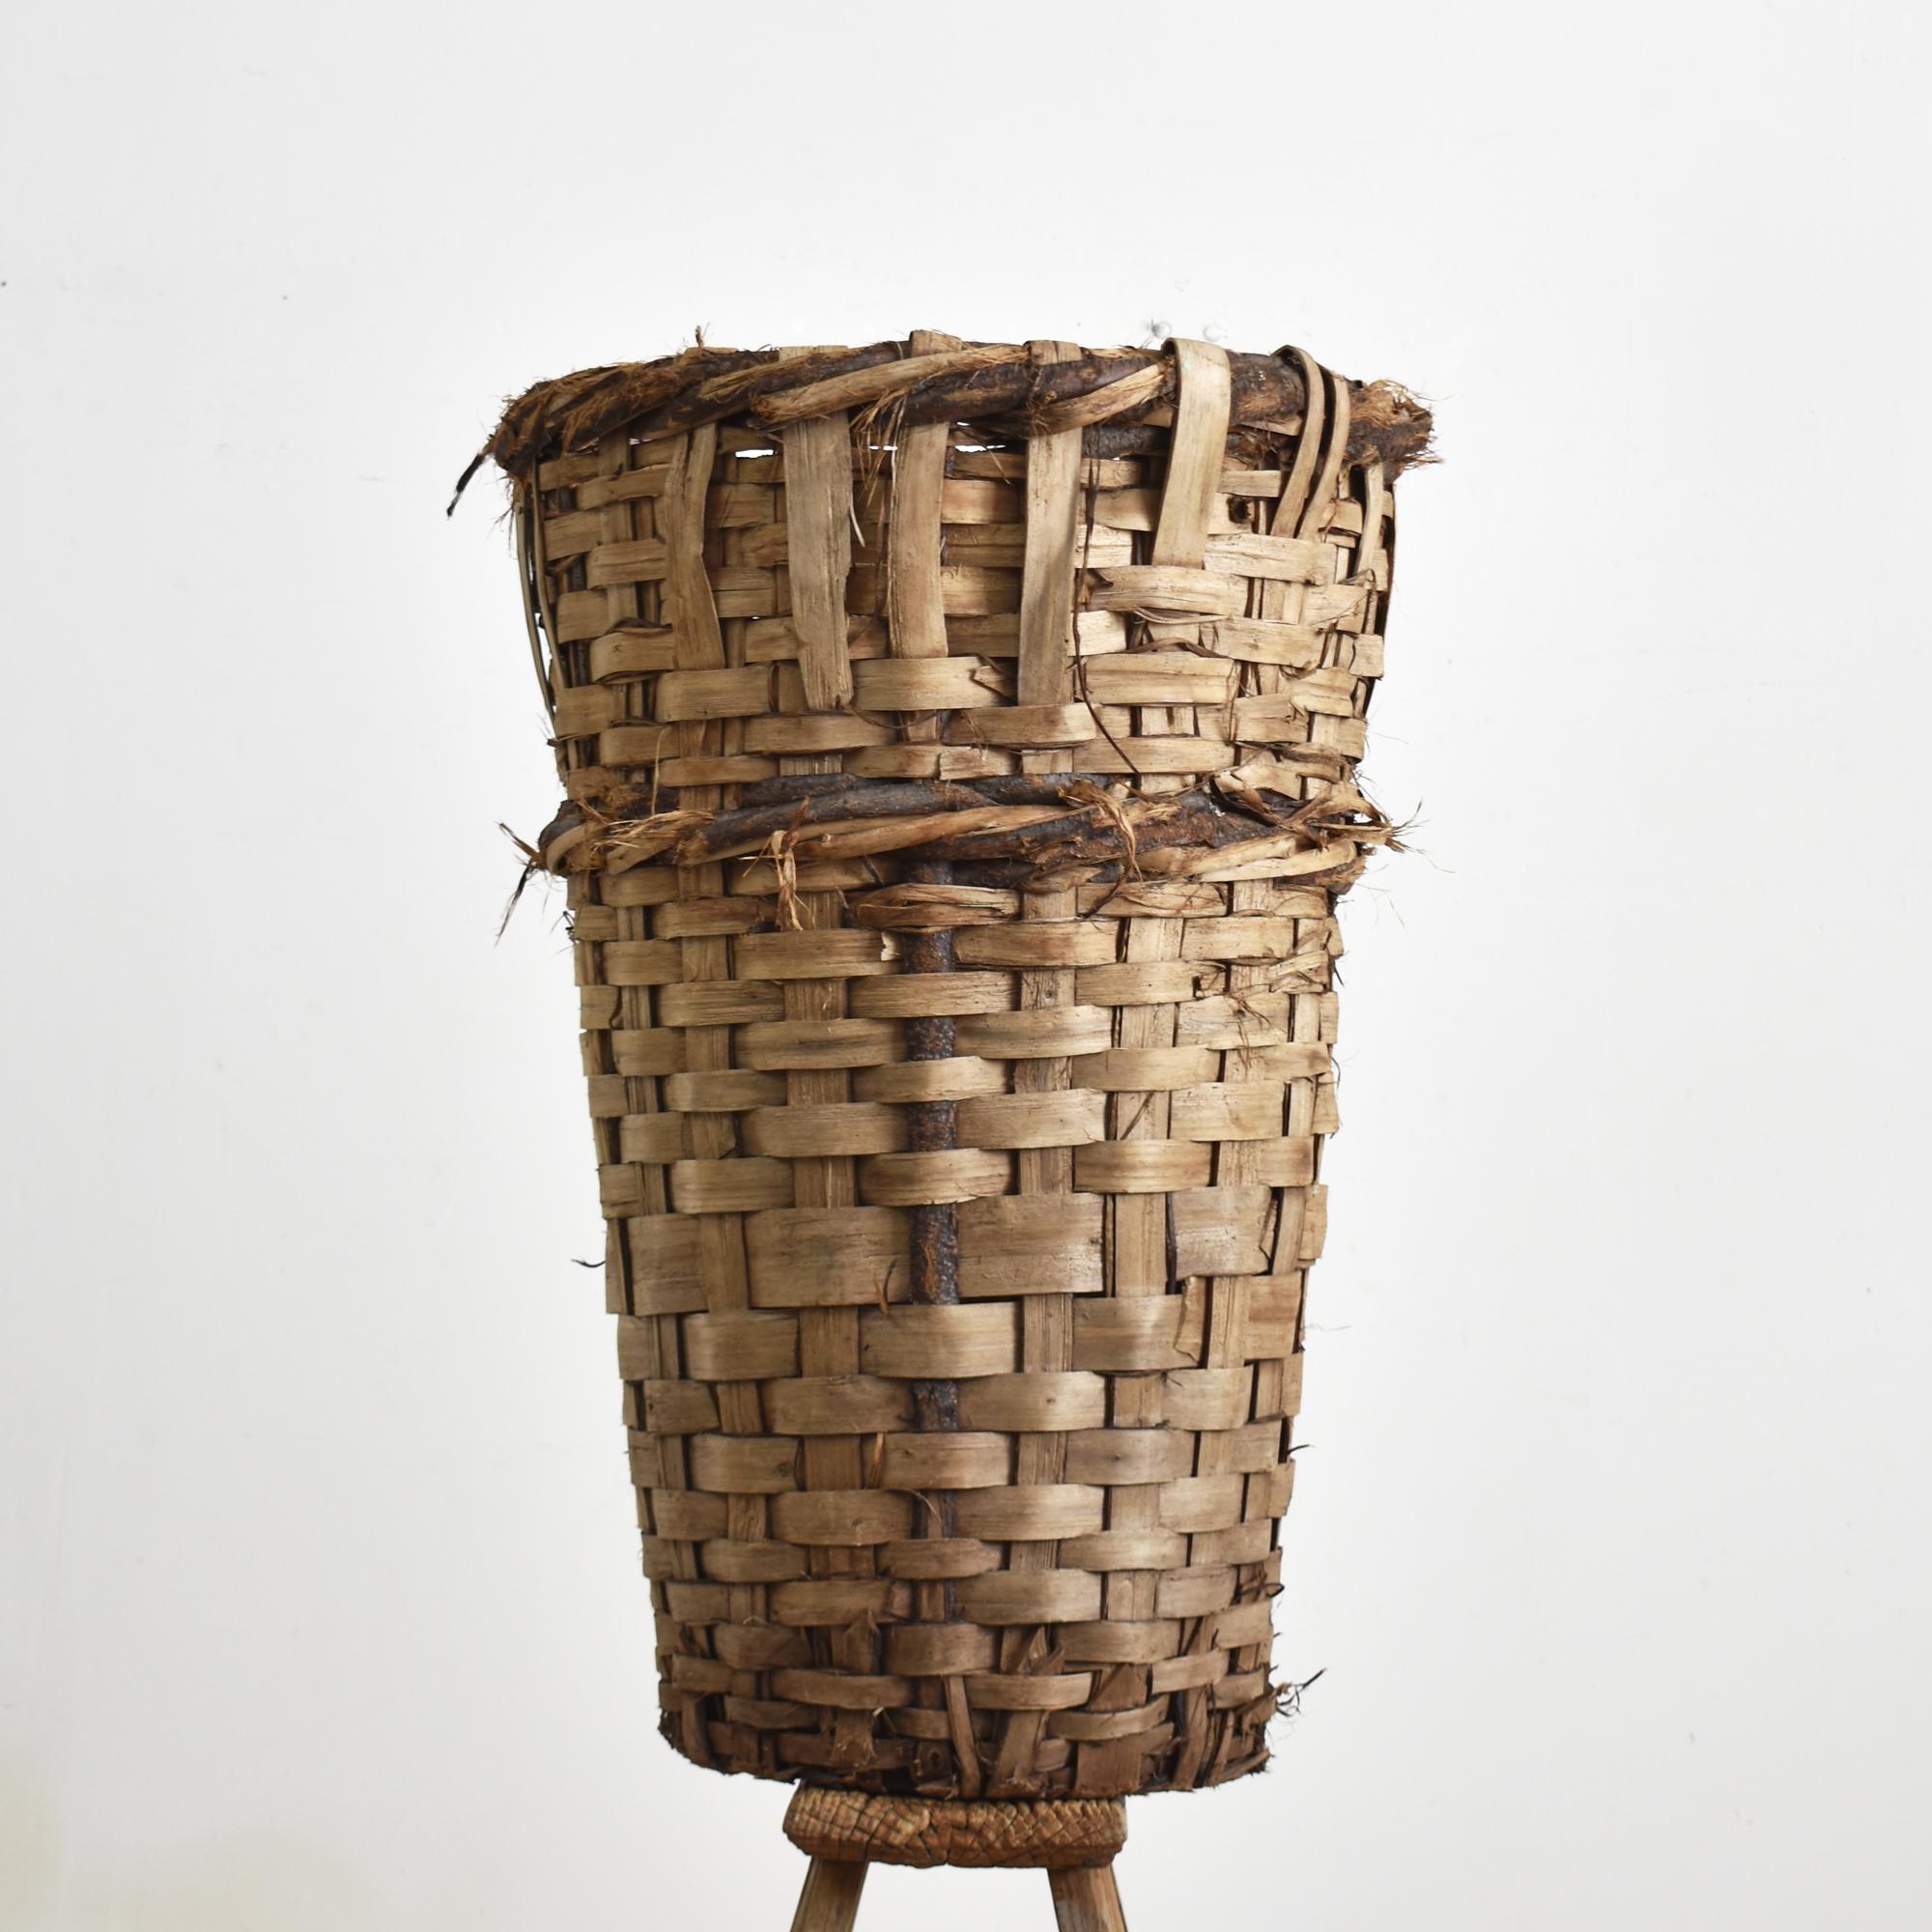 Antique Grape Harvest Log Basket – A

A beautiful hand-made wicker basket from Turkey used to harvest grapes. The basket is constructed from a thick weave designed to withstand the heavy use of grape harvesting The painted markings on the side